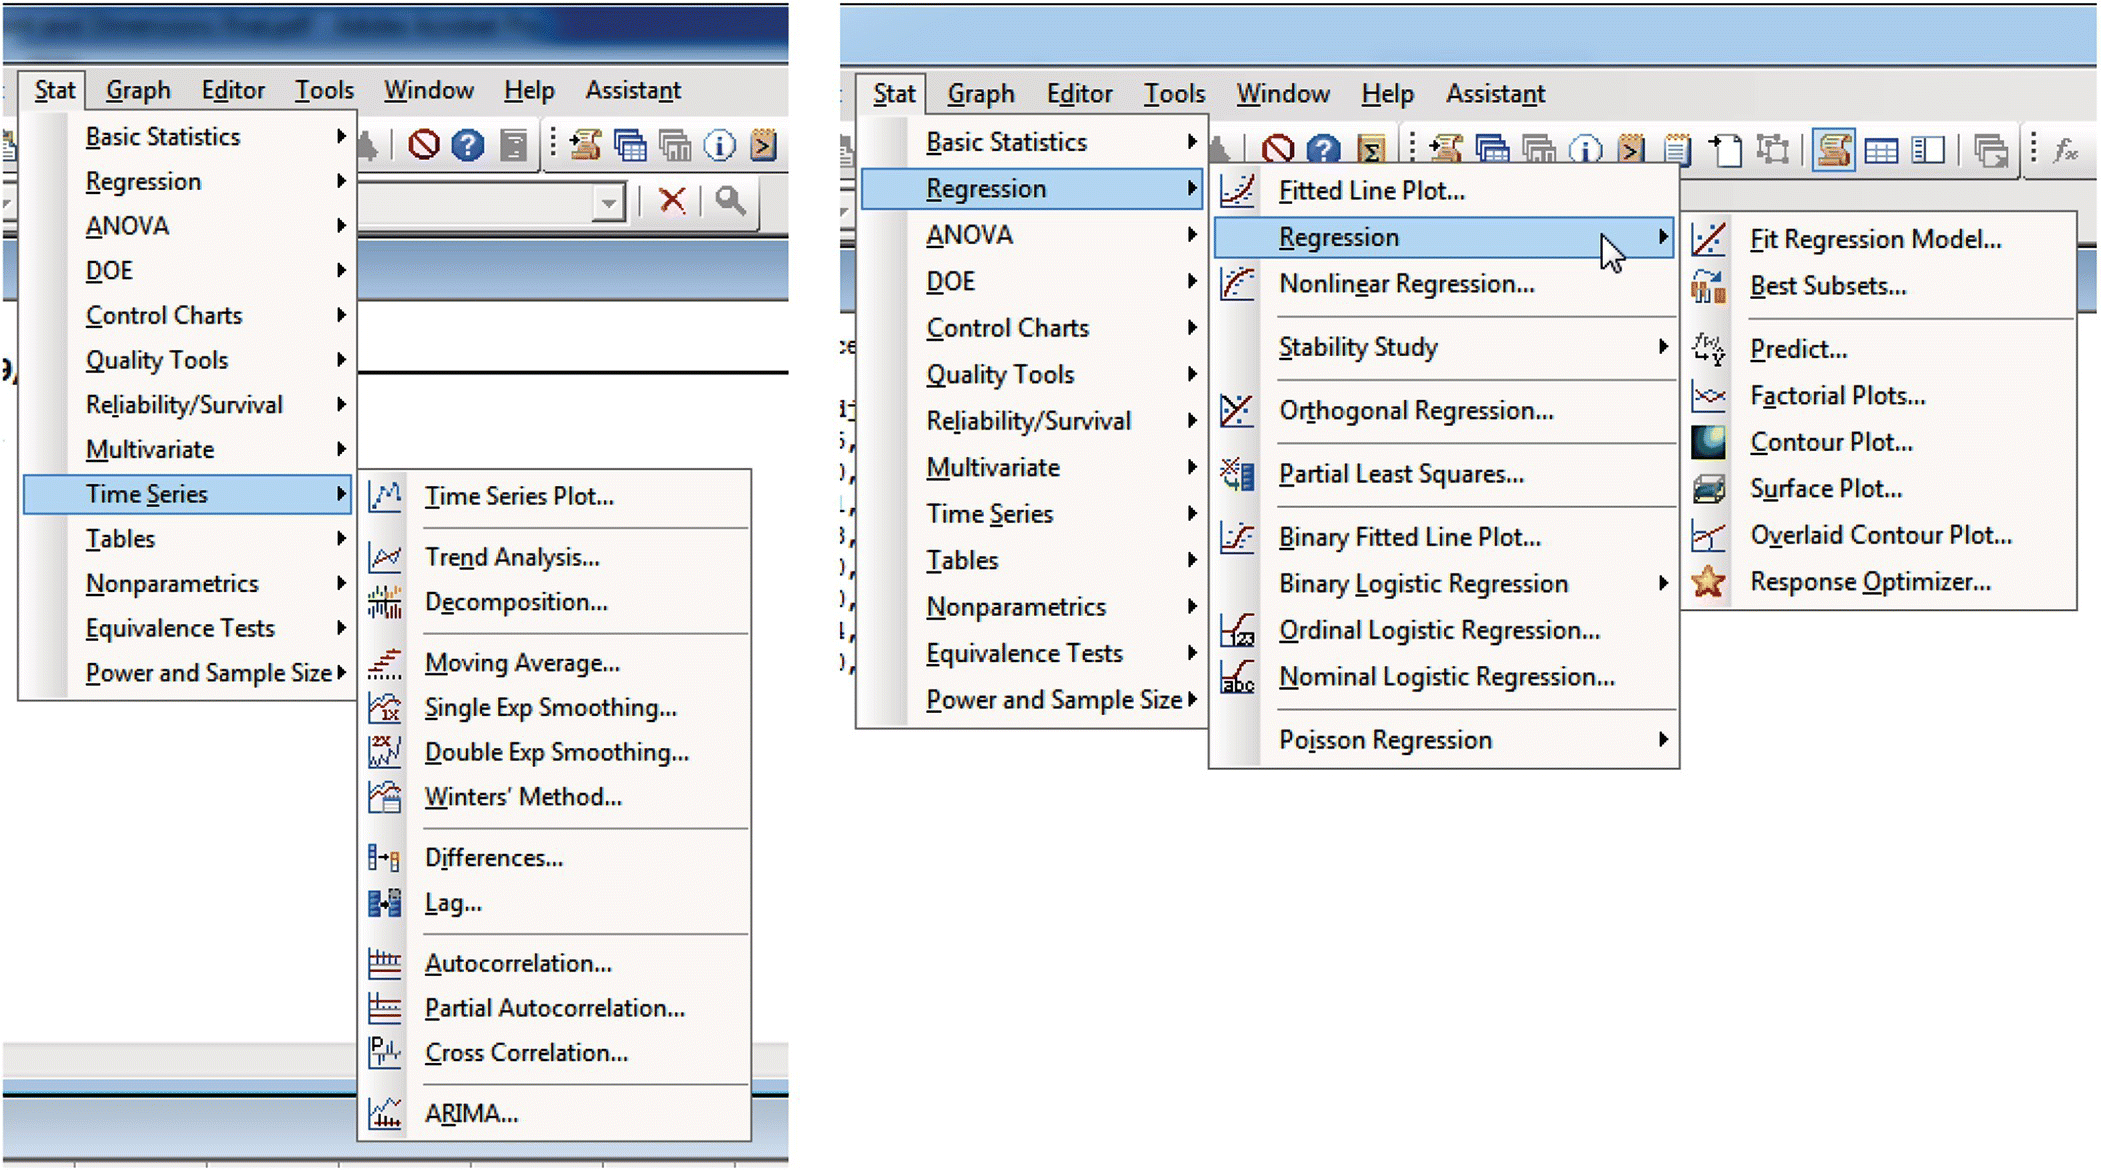 2 Screen captures of the Minitab window displaying a dropdown lists of the different Time Series options (left) and the different Regression options (right).